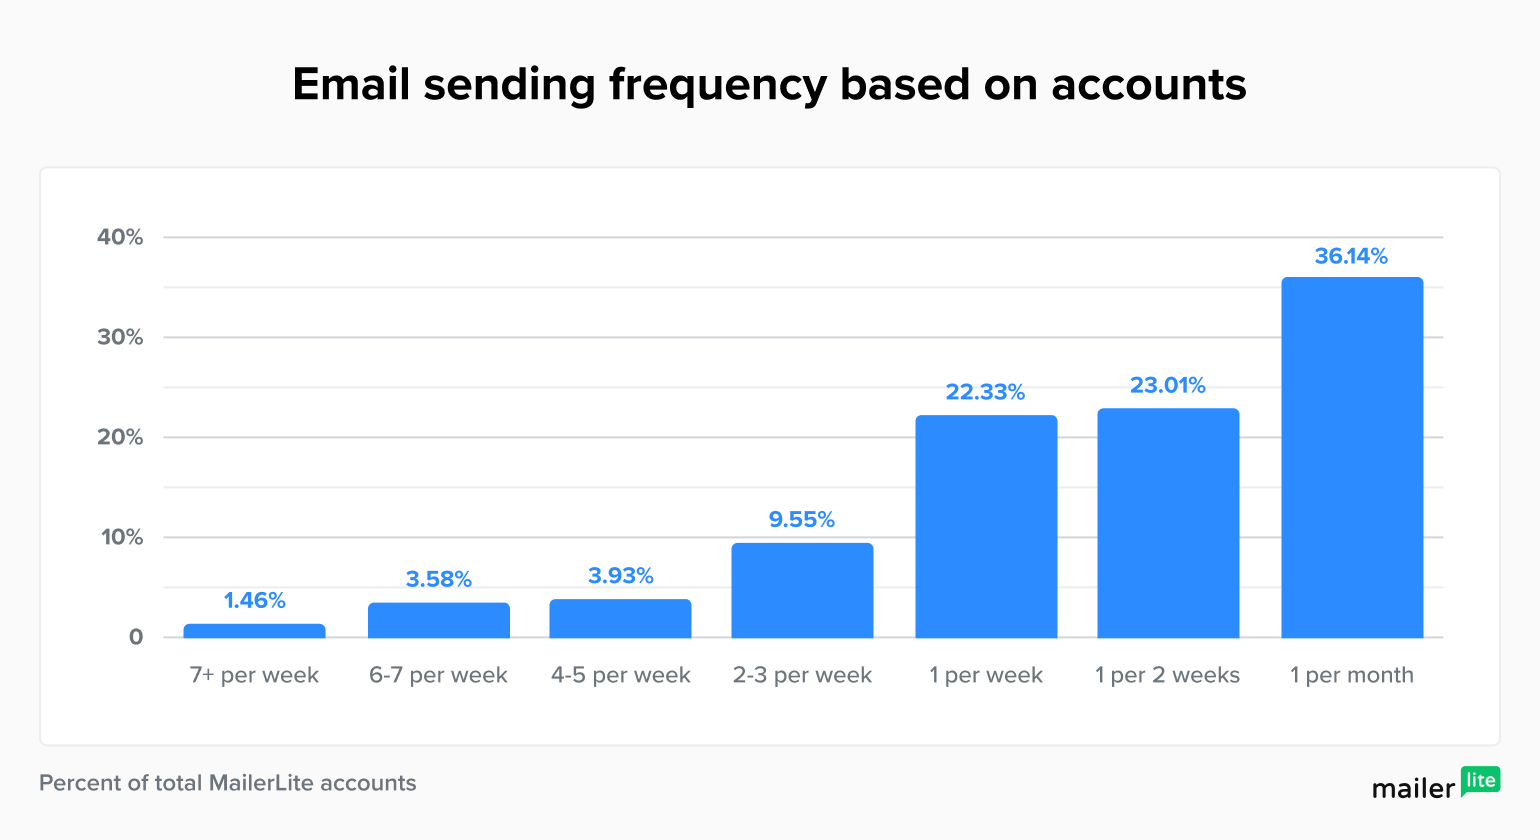 email sending frequency data compared chart - MailerLite